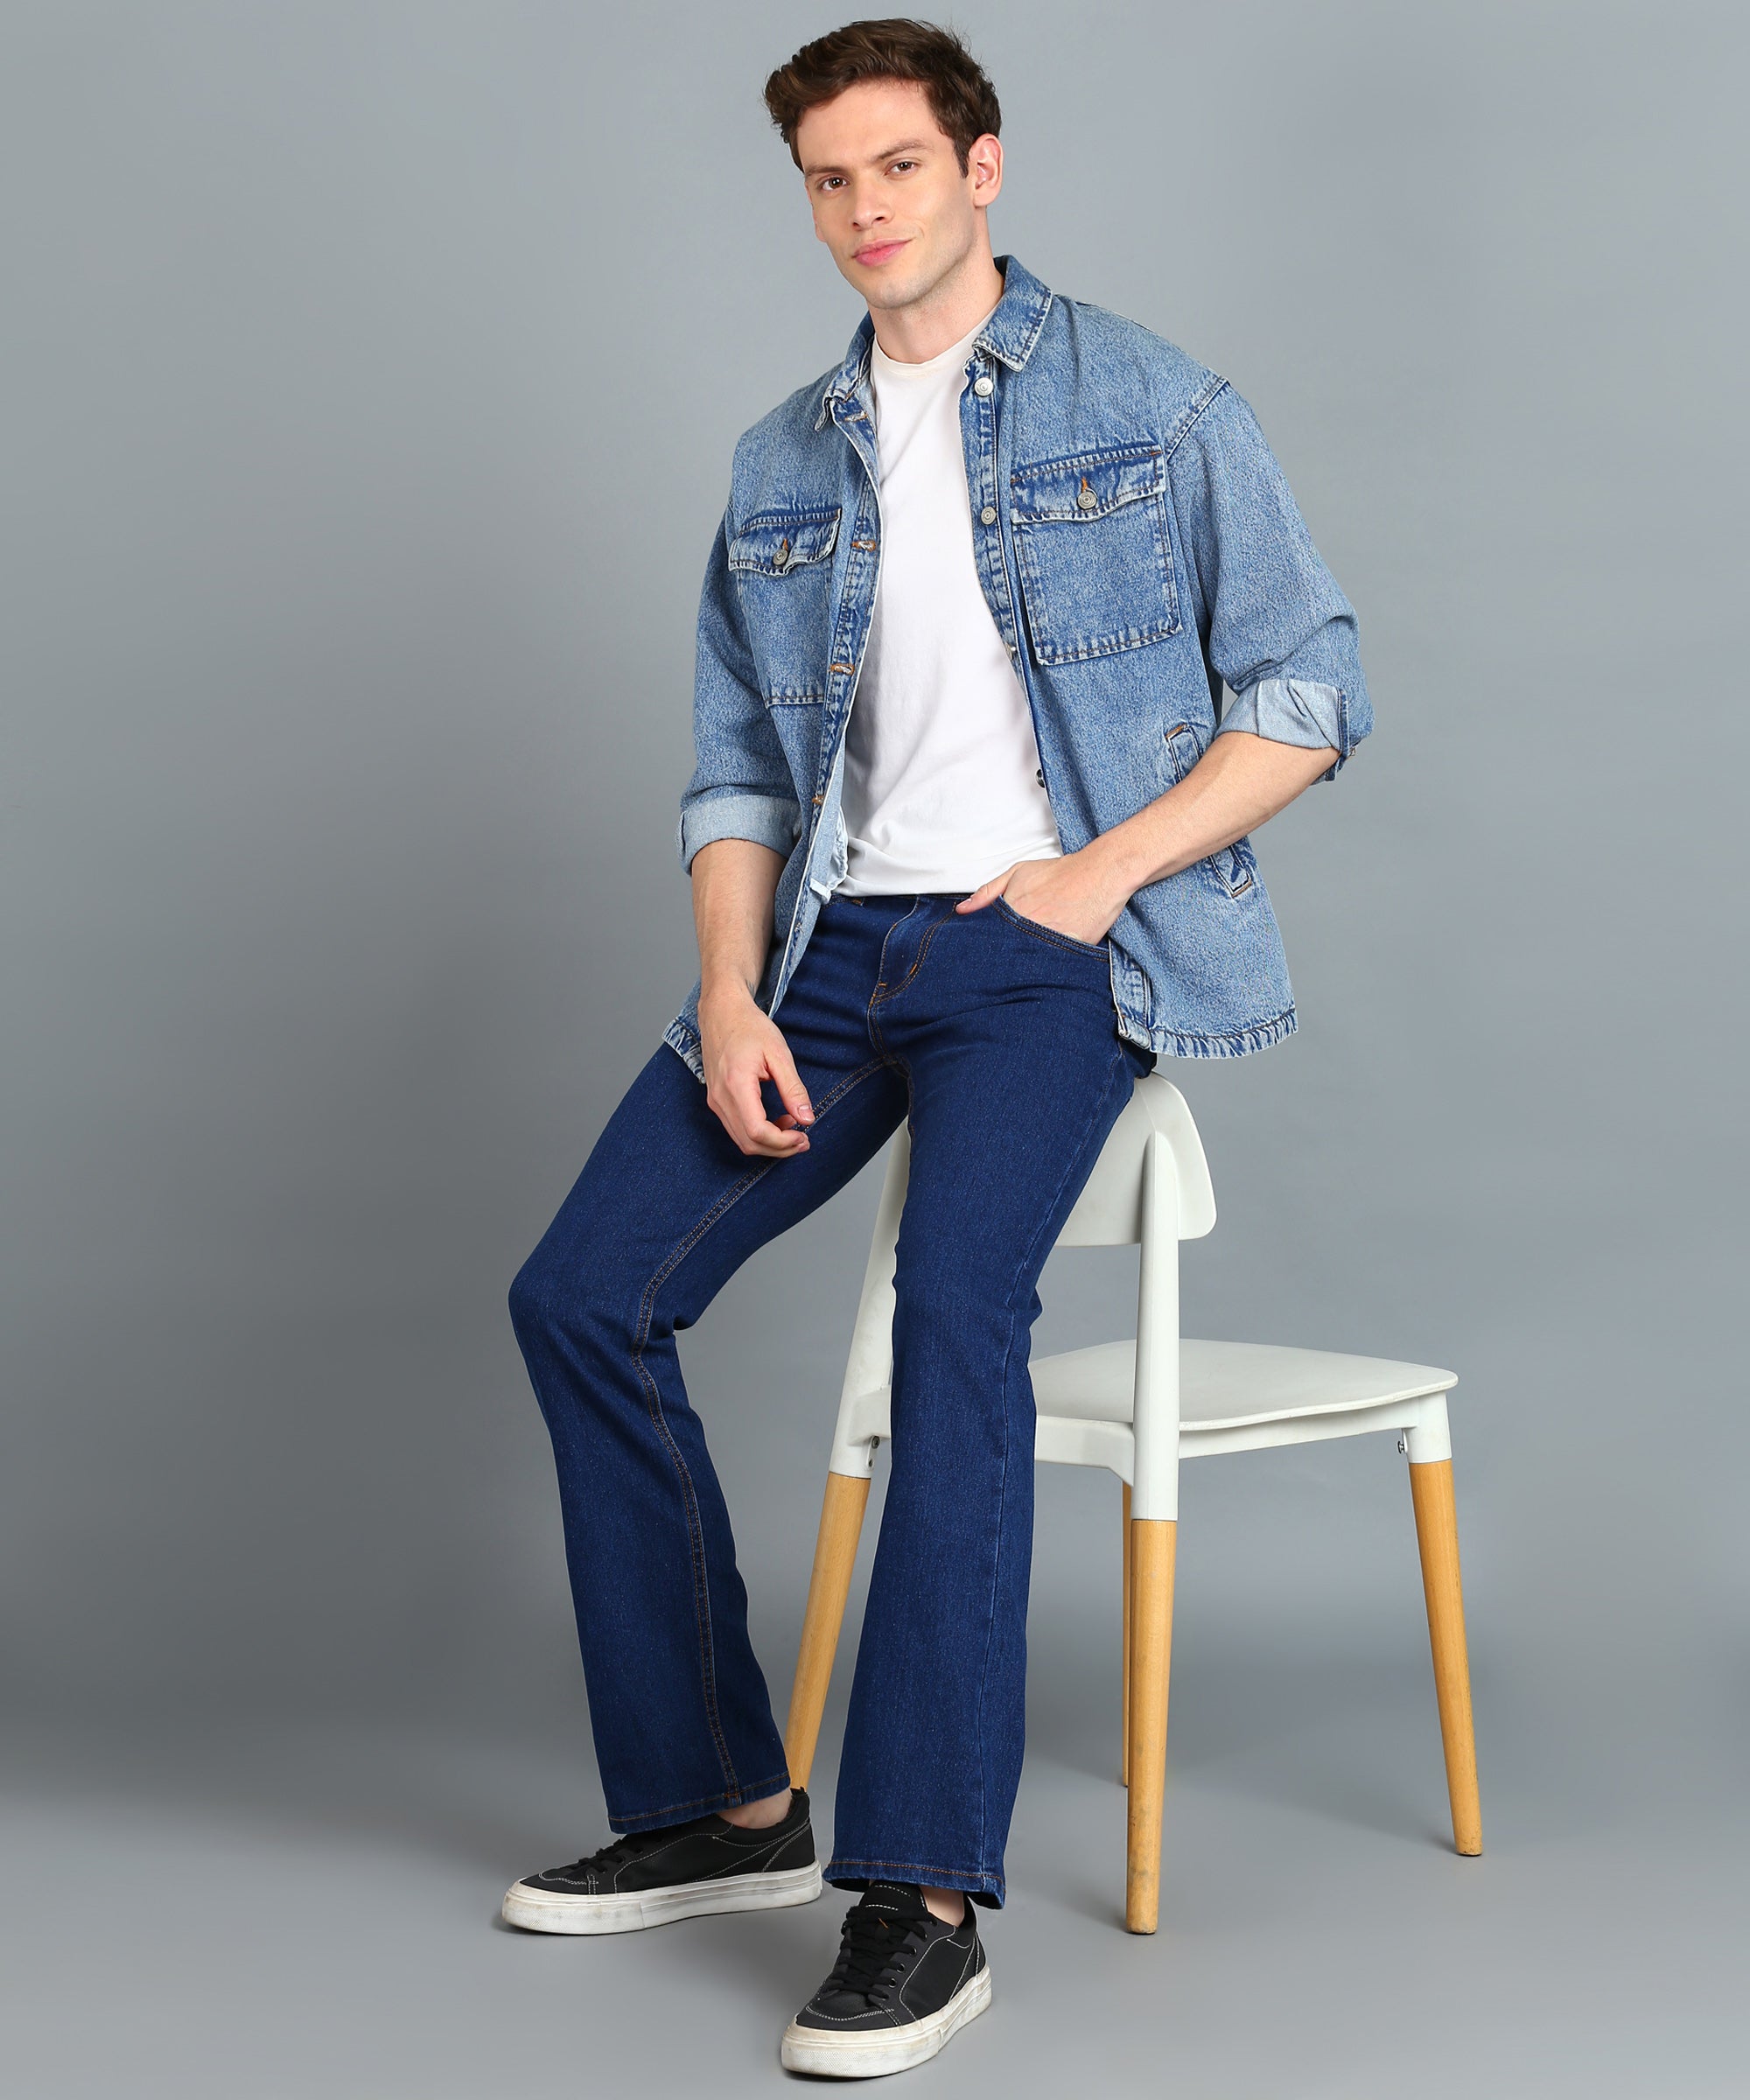 Men's Blue Washed Bootcut Jeans Stretchable